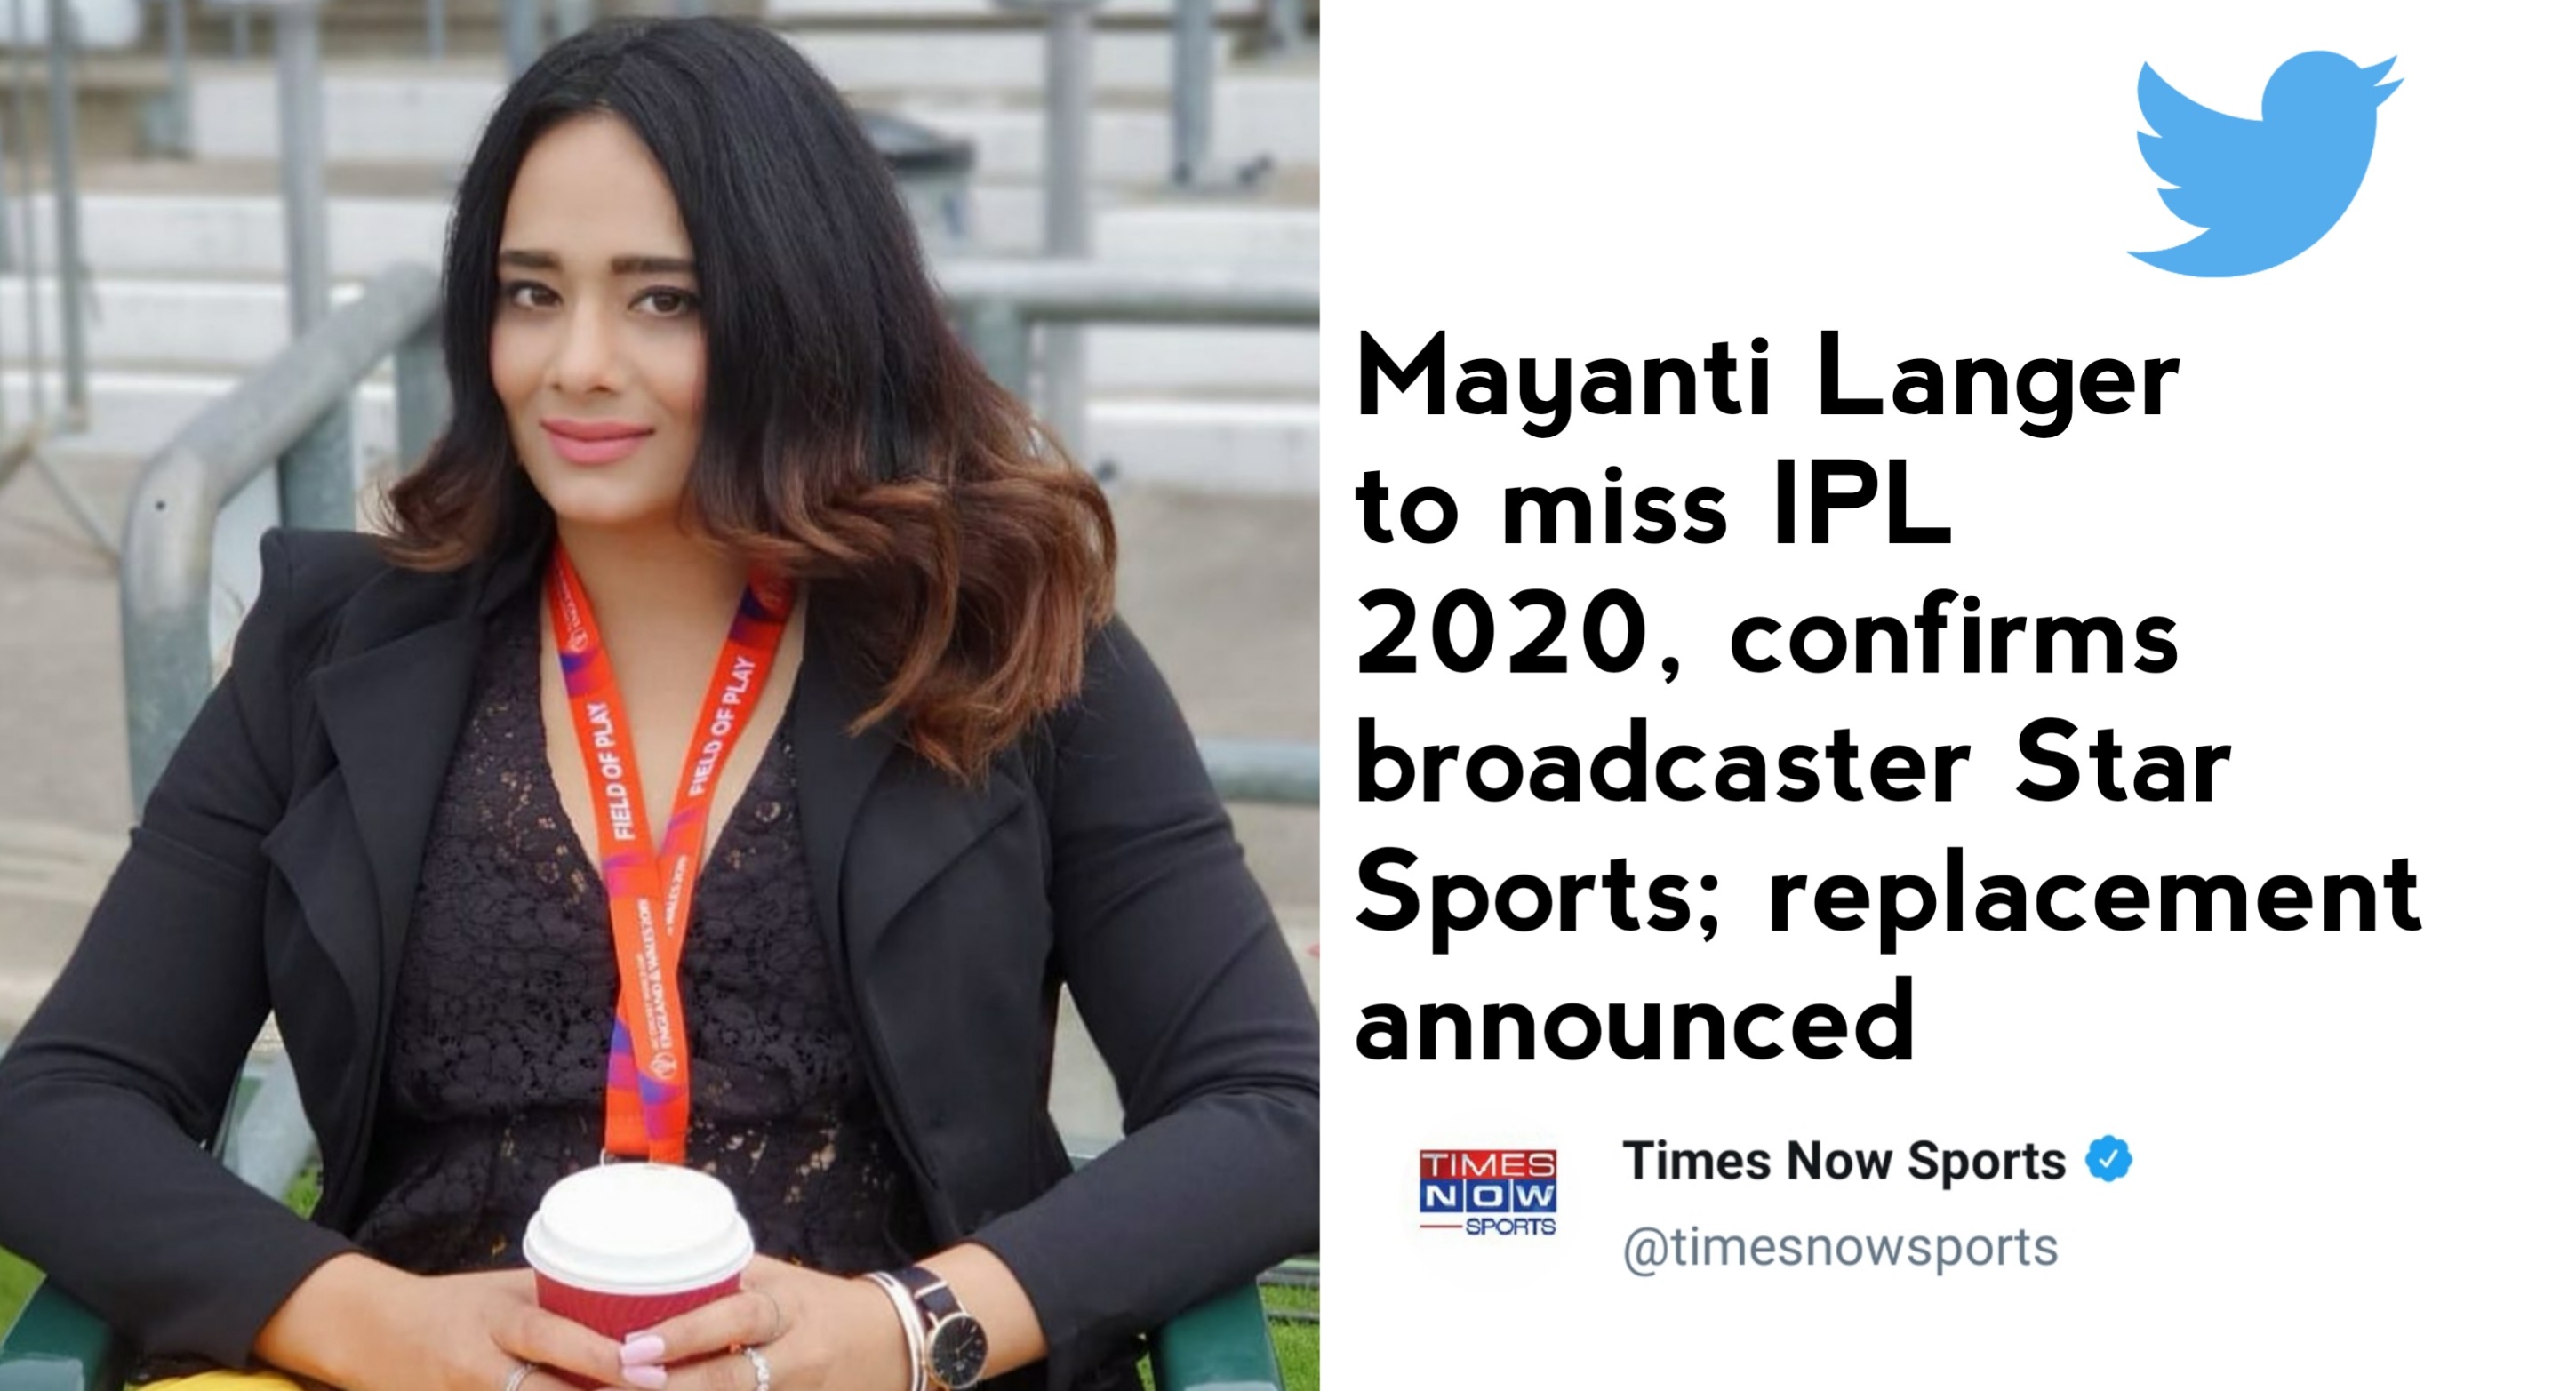 Mayanti Langer gives a fitting reply to Times Now for using 'Replacement' term